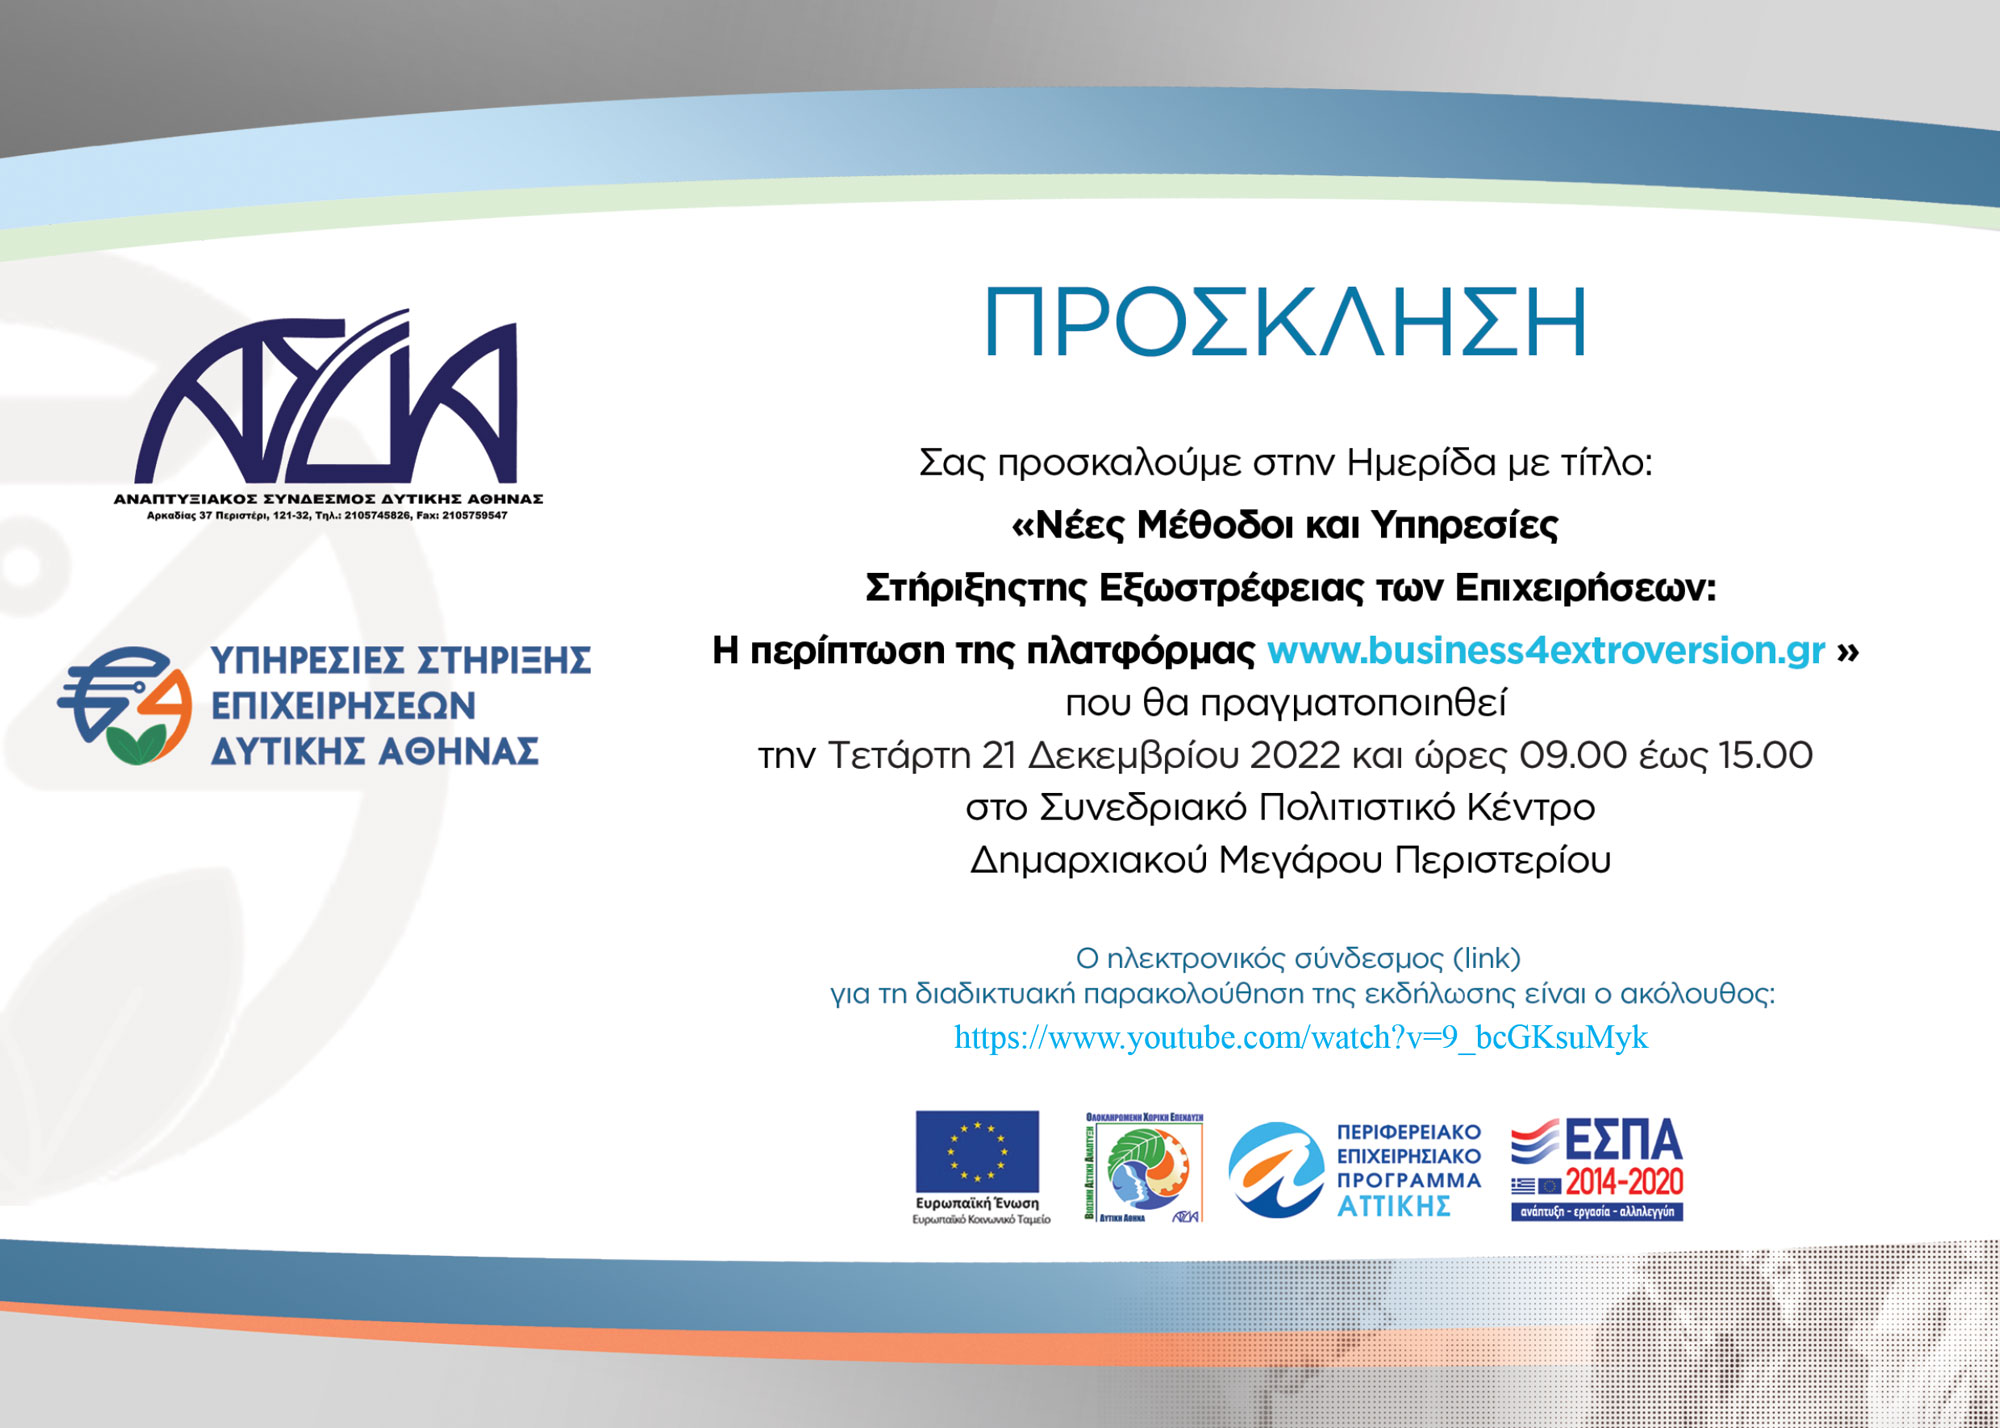 Workshop “New Methods and Services to Support the Extroversion of Enterprises in Western Athens: The case of the platform www.business4extroversion.gr” Dec 6, 2022